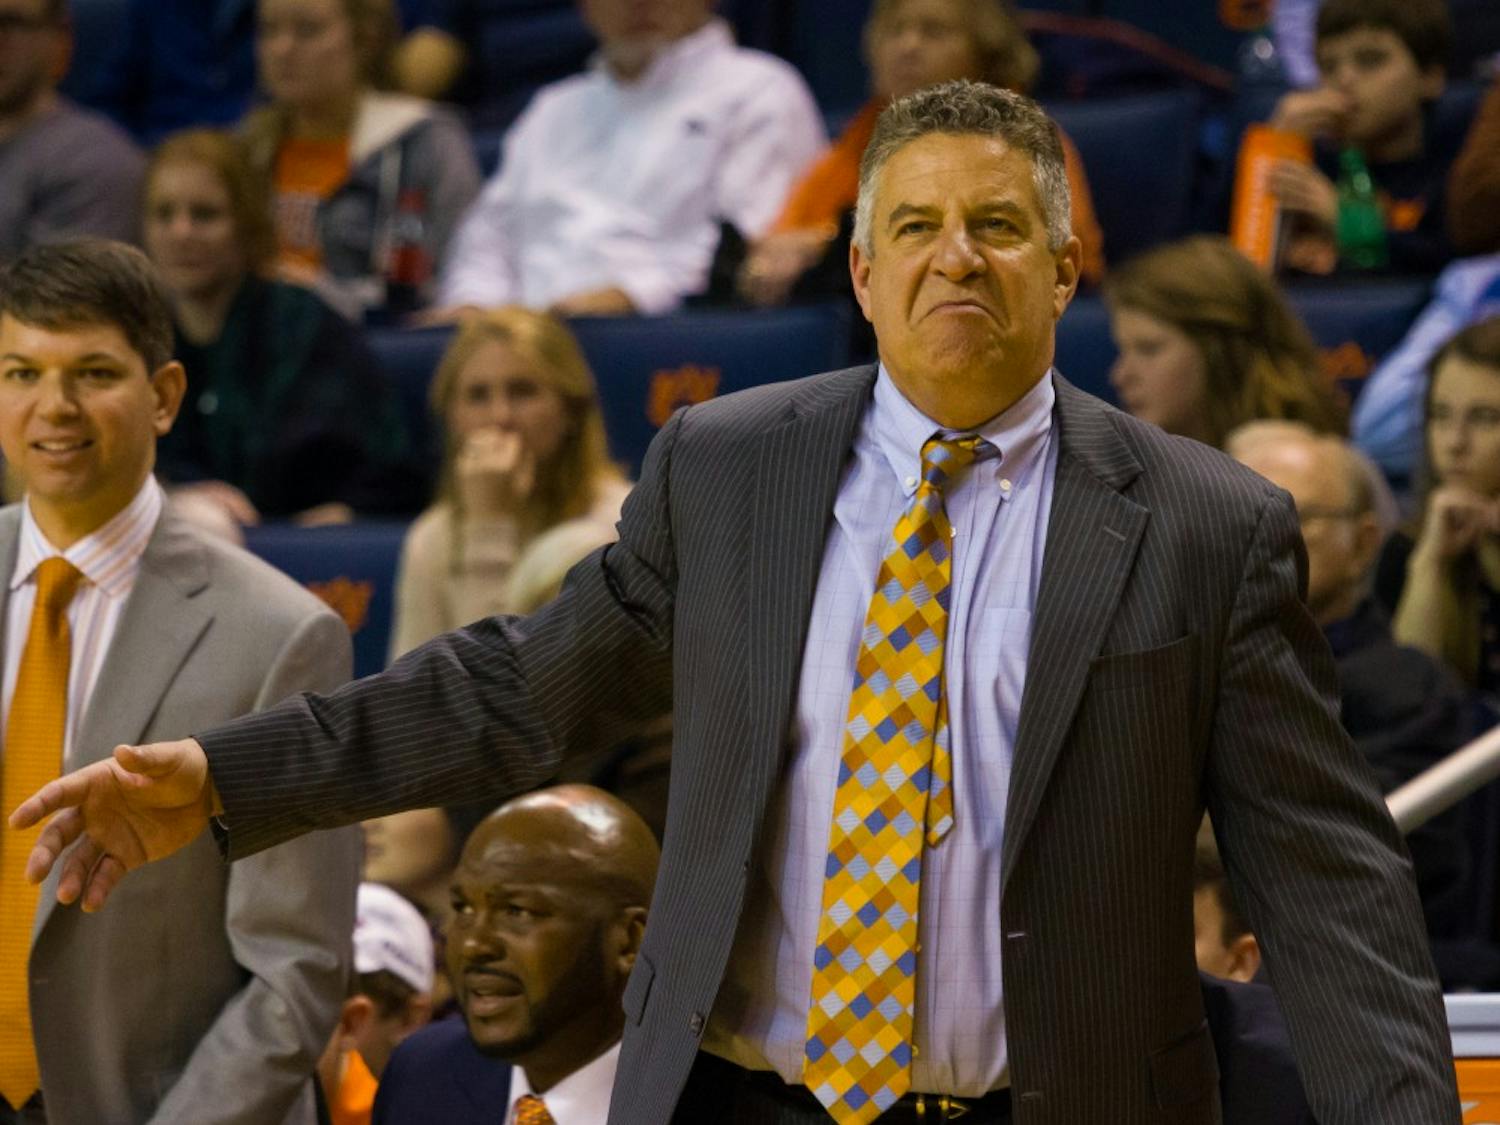 Coach Bruce Pearl frowns after a play goes wrong. South Carolina vs. Auburn at Auburn Arena on Jan. 5, 2016.